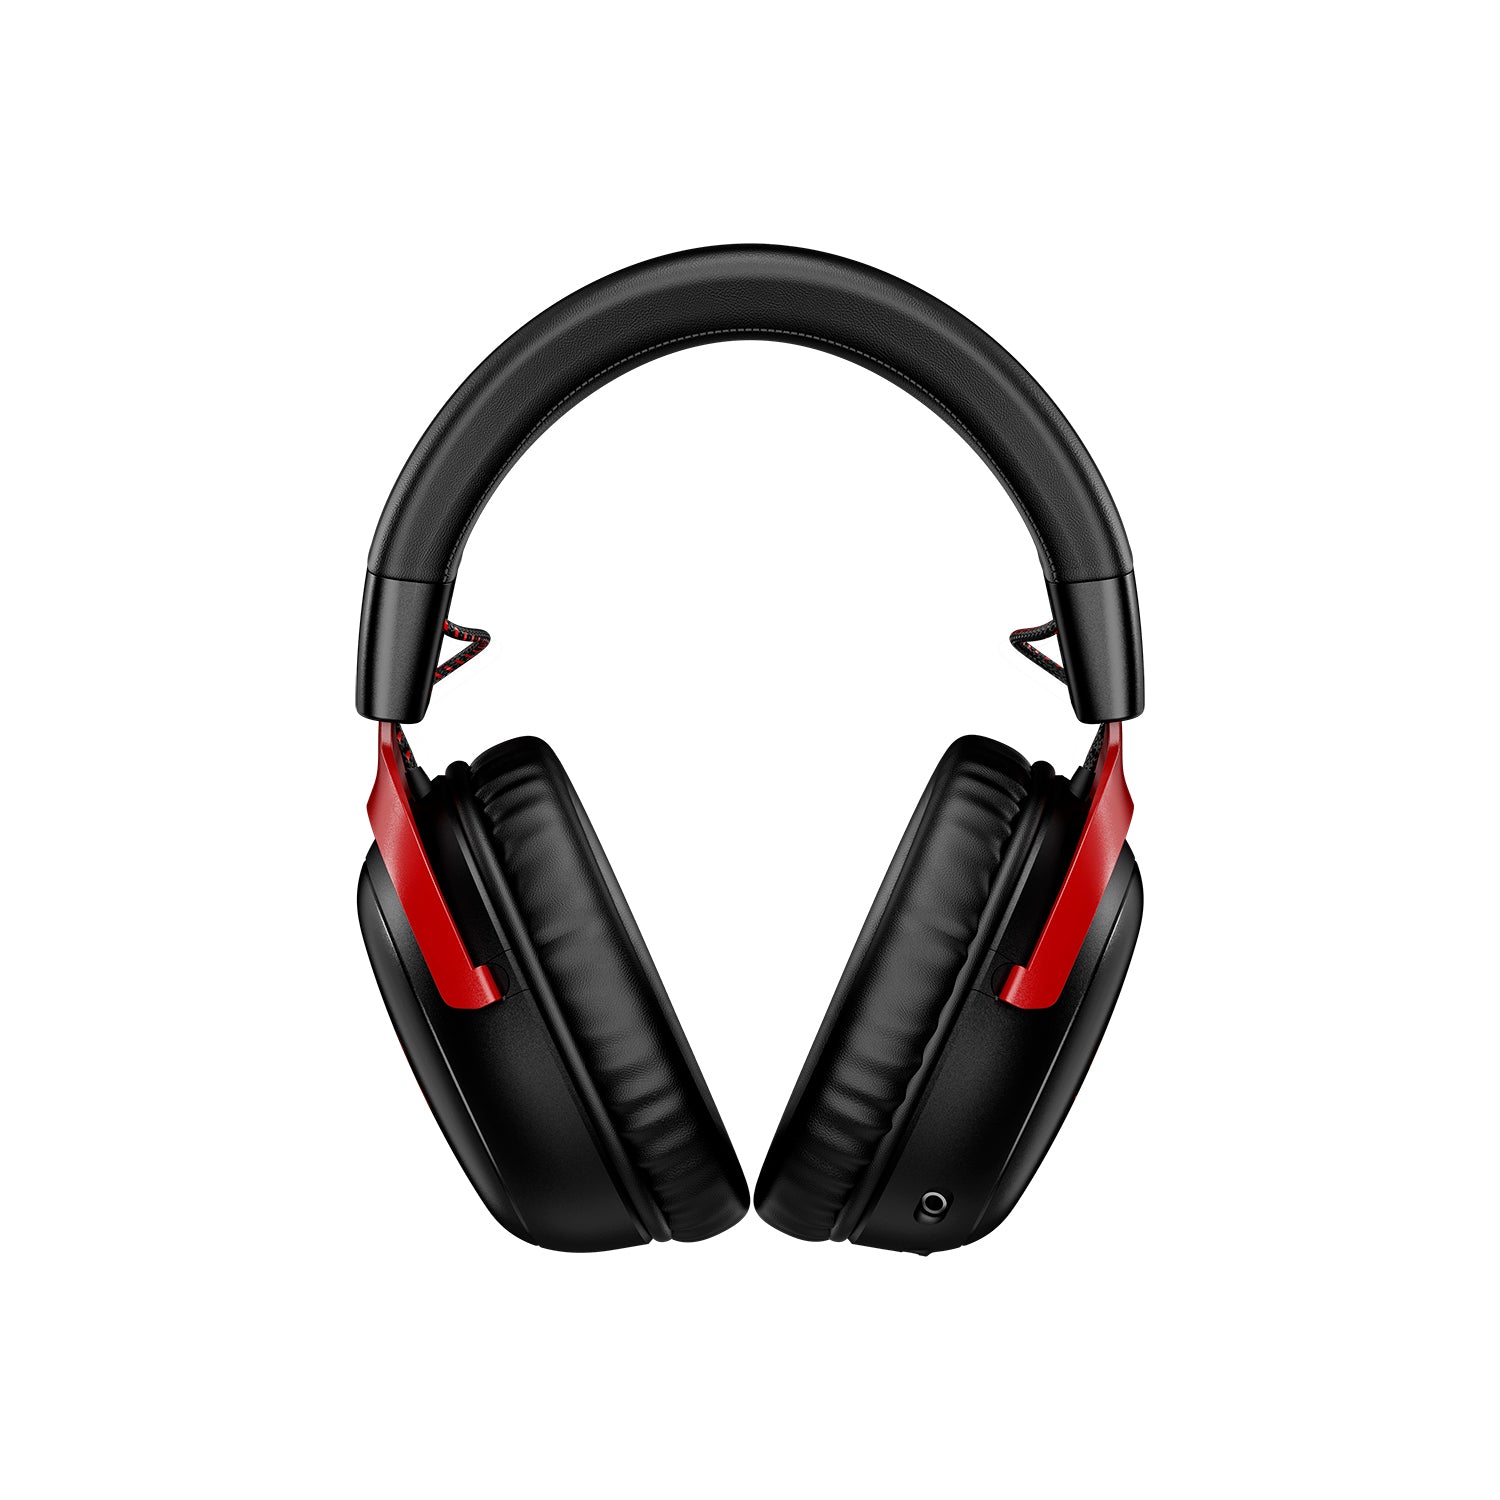 HyperX Cloud III Wireless Black-Red Gaming Headset - front view